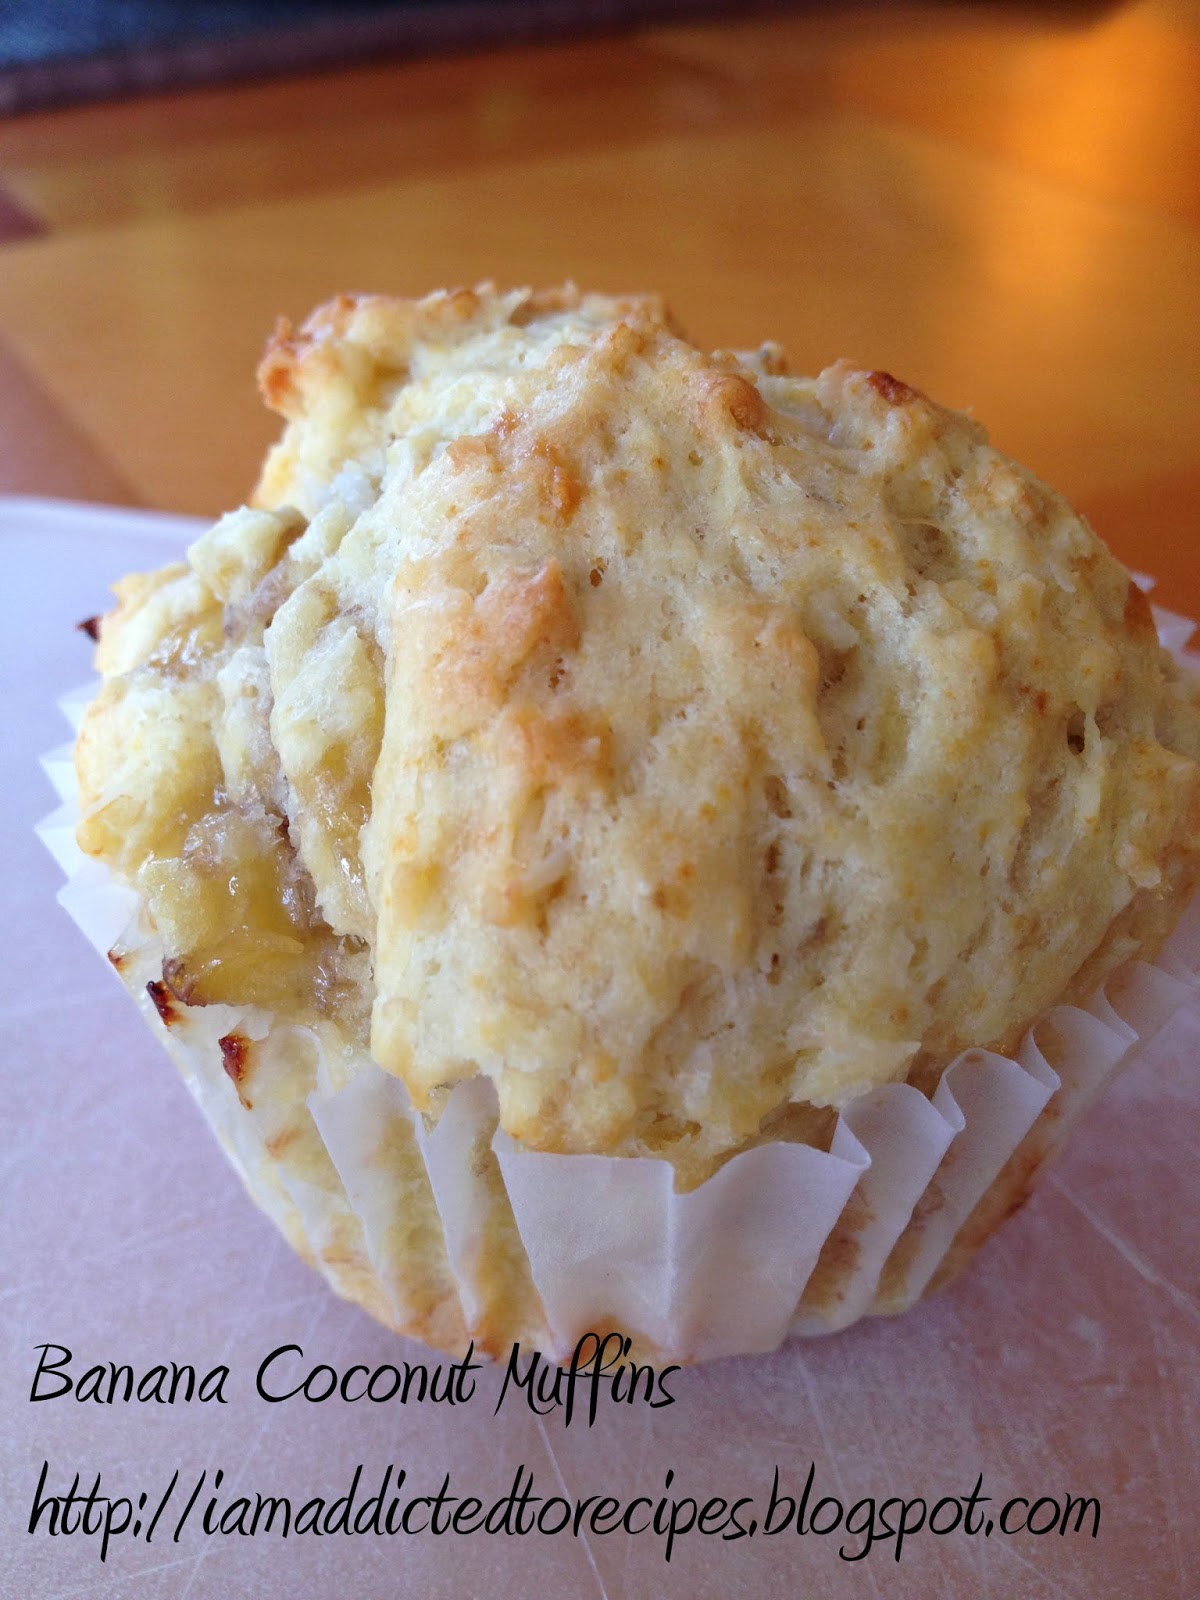 Banana Coconut Muffins | Addicted to Recipes